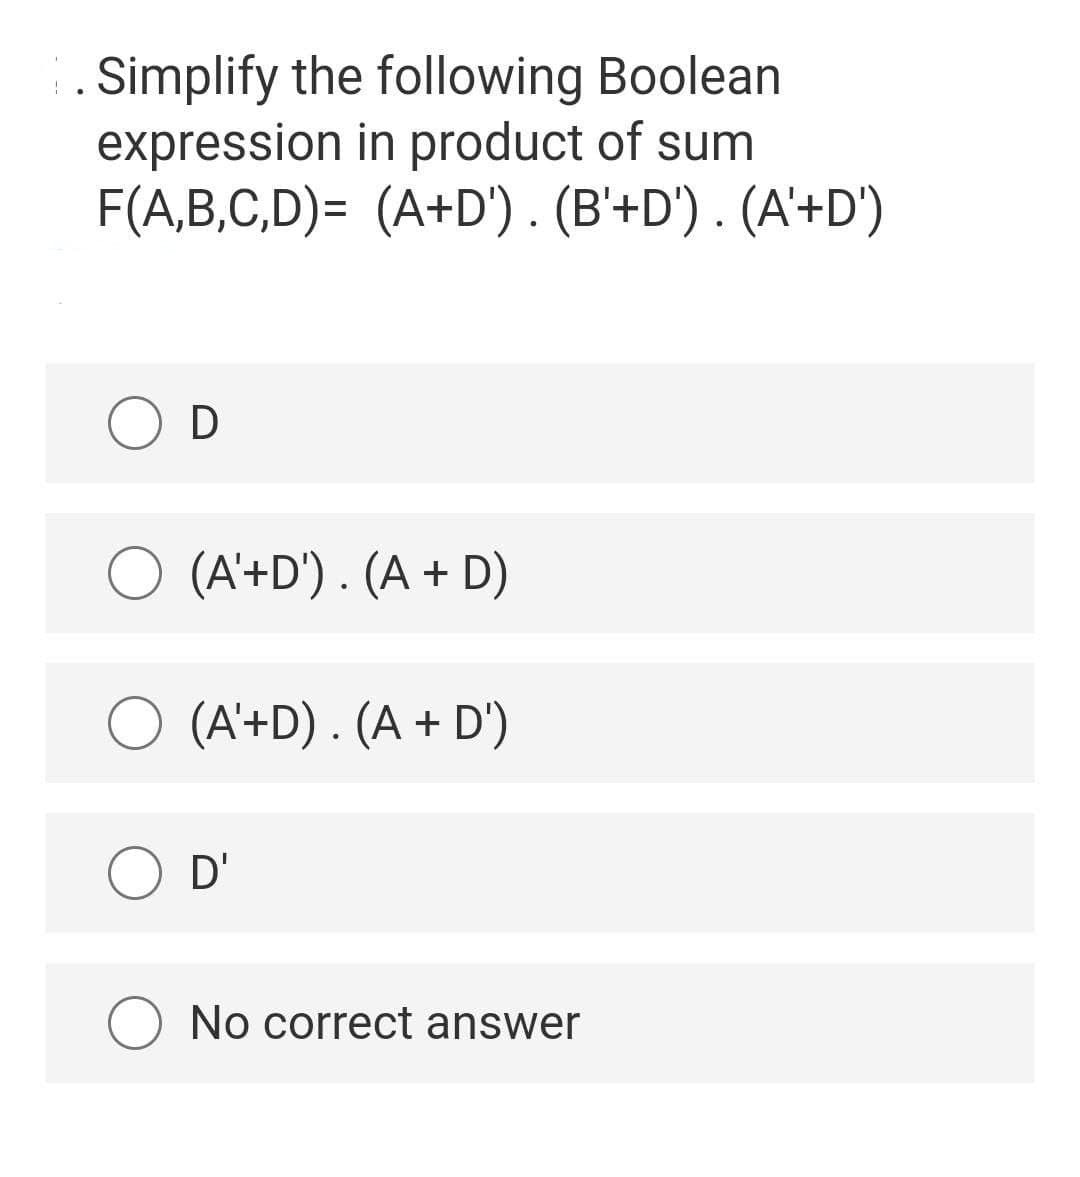 . Simplify the following Boolean
expression in product of sum
F(A,B,C,D)= (A+D') . (B'+D') . (A'+D')
O (A'+D') . (A + D)
(A'+D) . (A + D')
O D'
No correct answer
